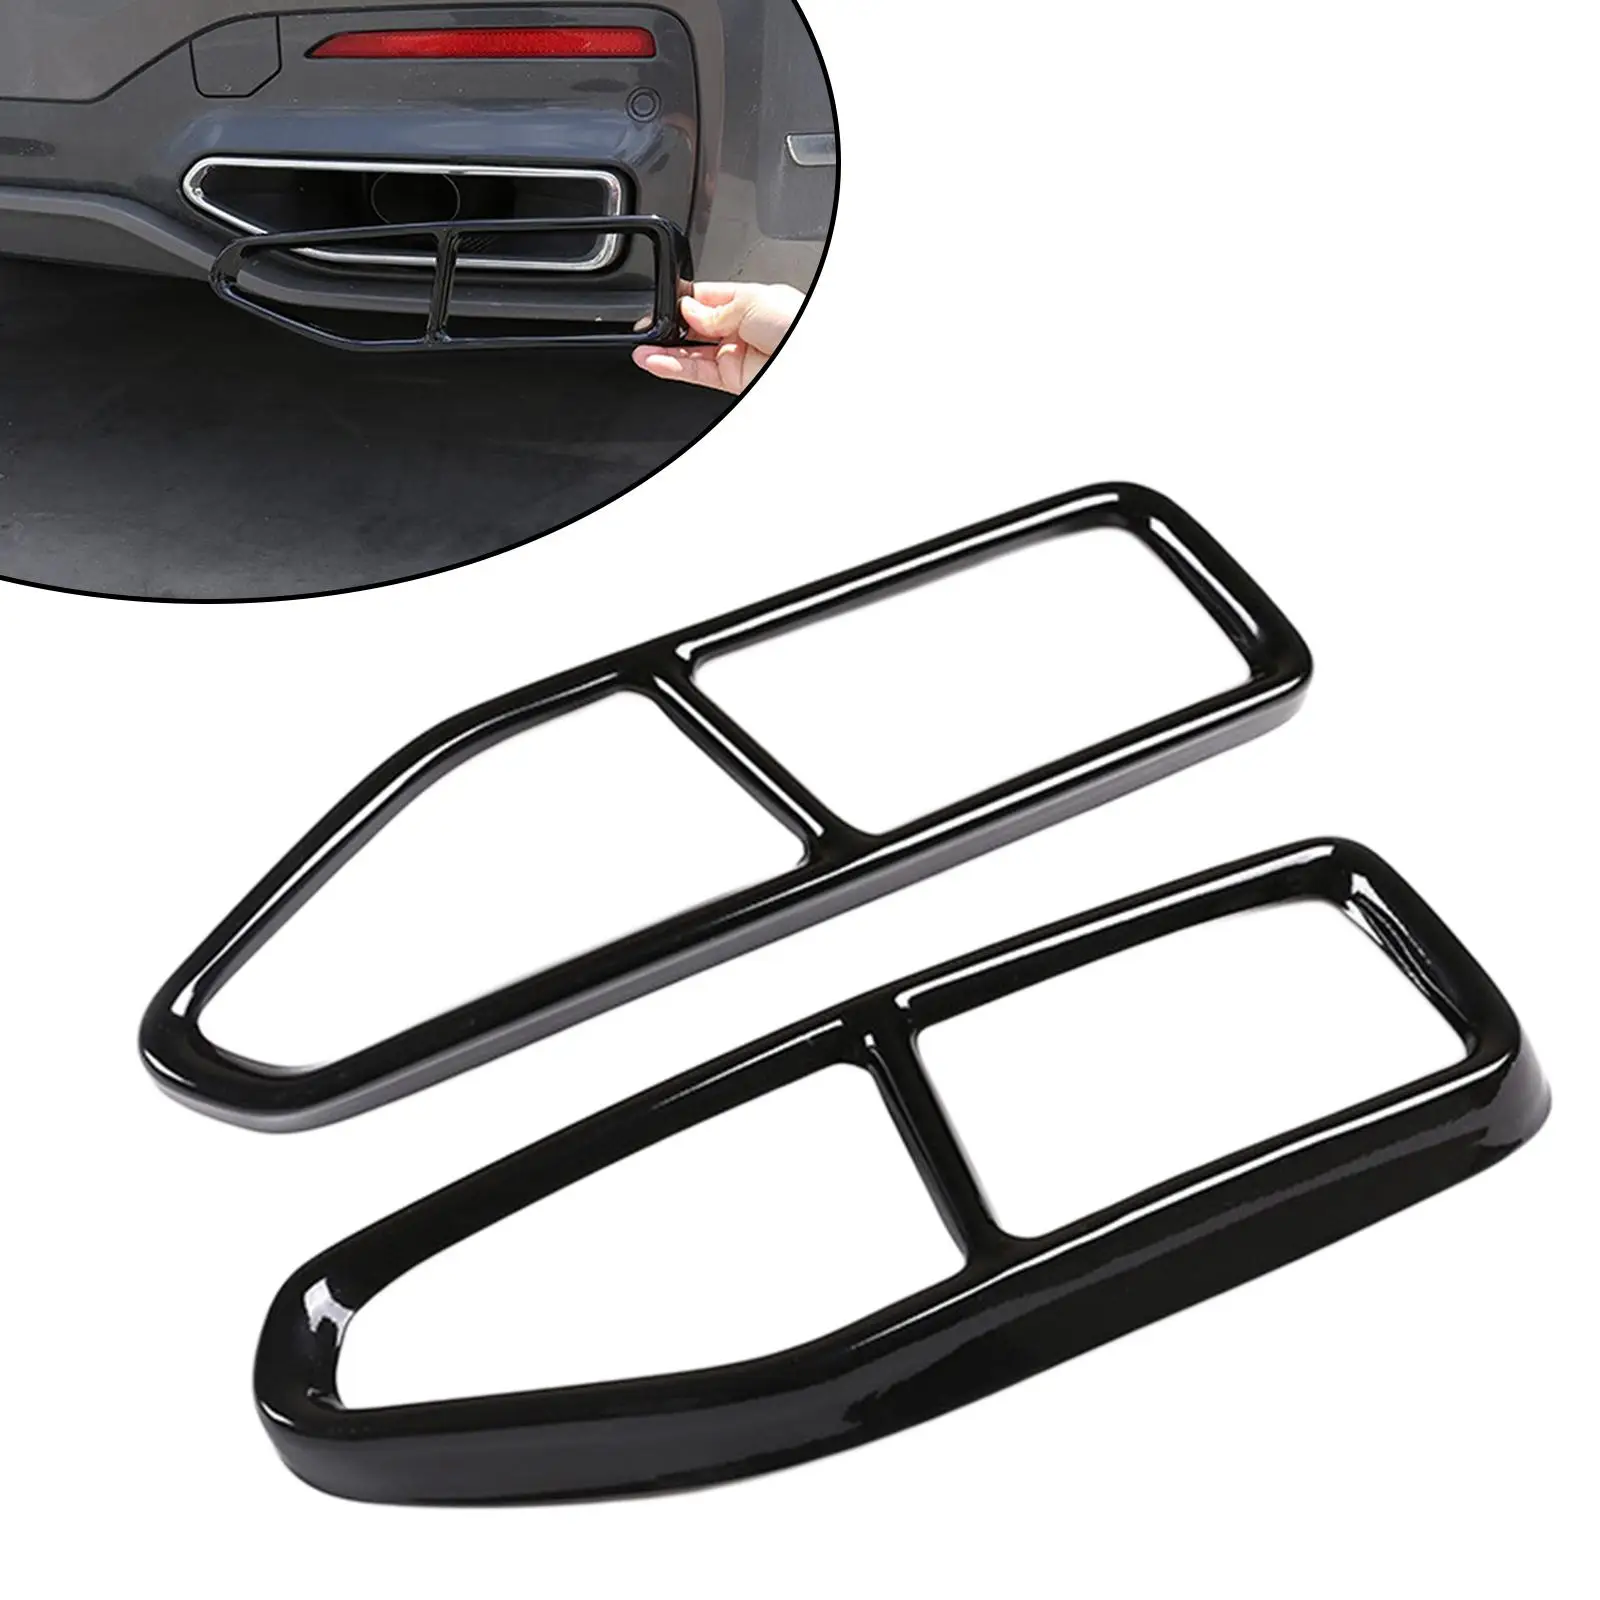 2x Stainless Steel Tailpipe Trim Frame Decoration Cover Rustproof Left Right Exhaust Pipe Output Cover for BMW 7 G11 G12